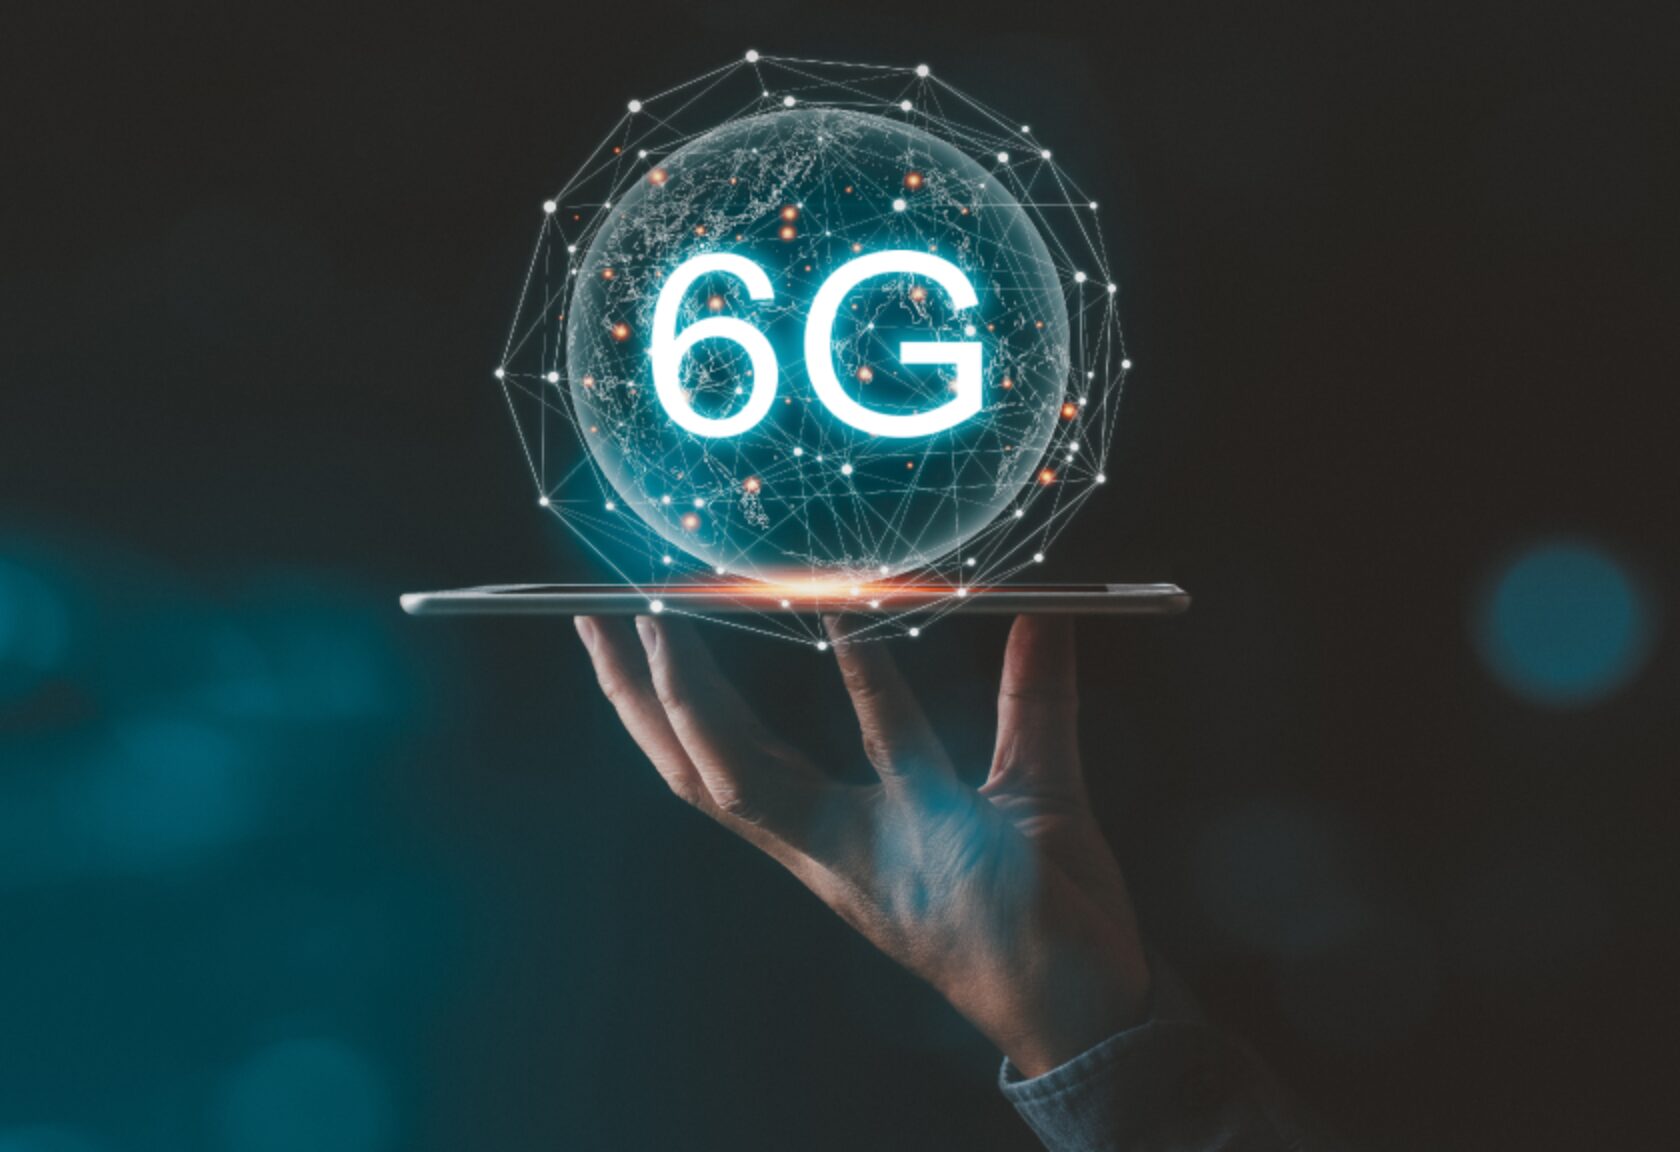 New ambient computing breakthrough from Wiliot to enable the Massive IoT, as 6G standards are set to define the future of telecommunications